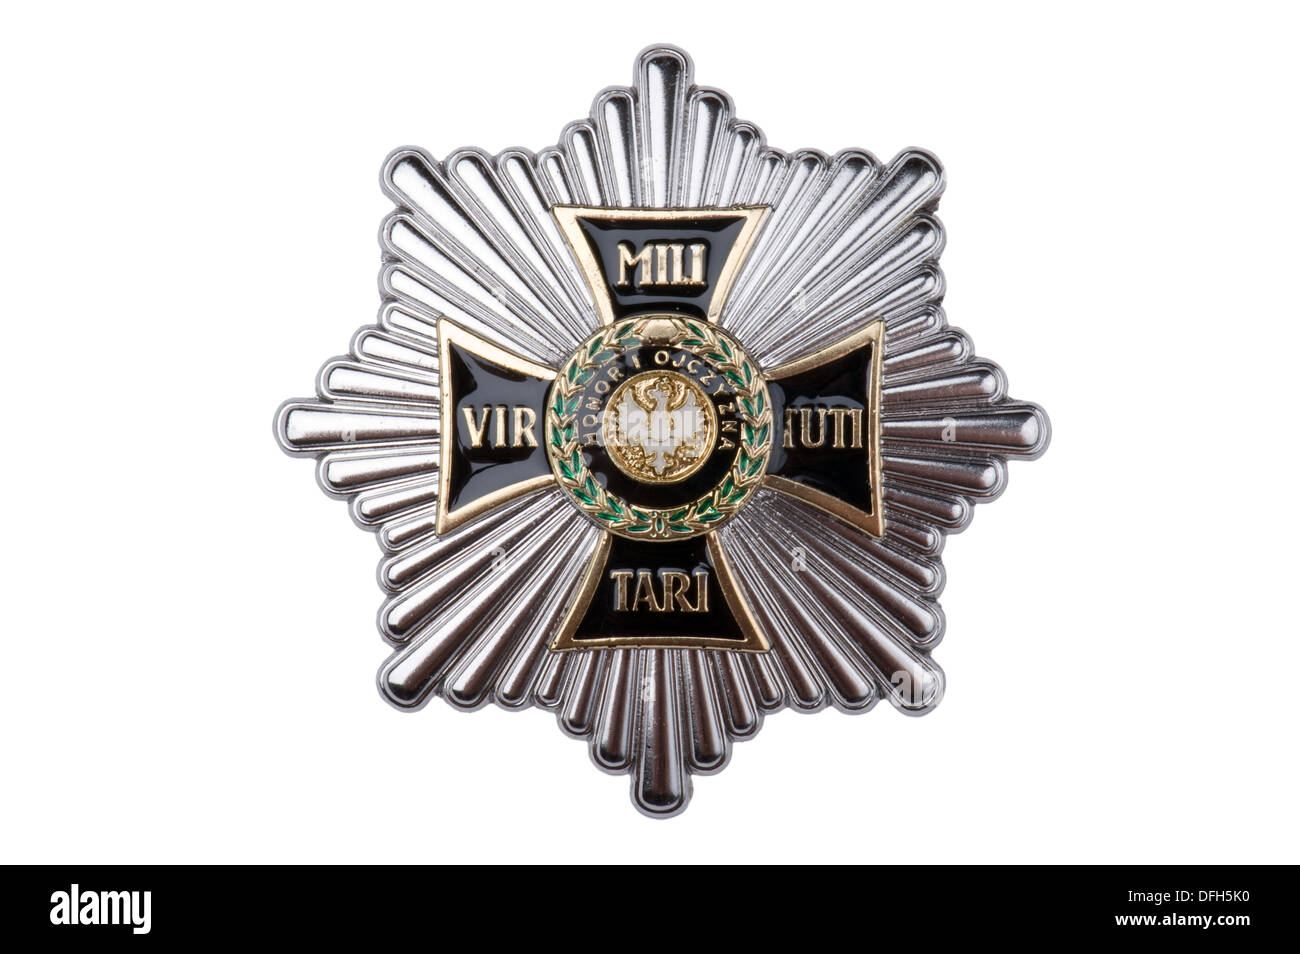 awards of the Russian Empire Star of the Order of the White Eagle Stock Photo